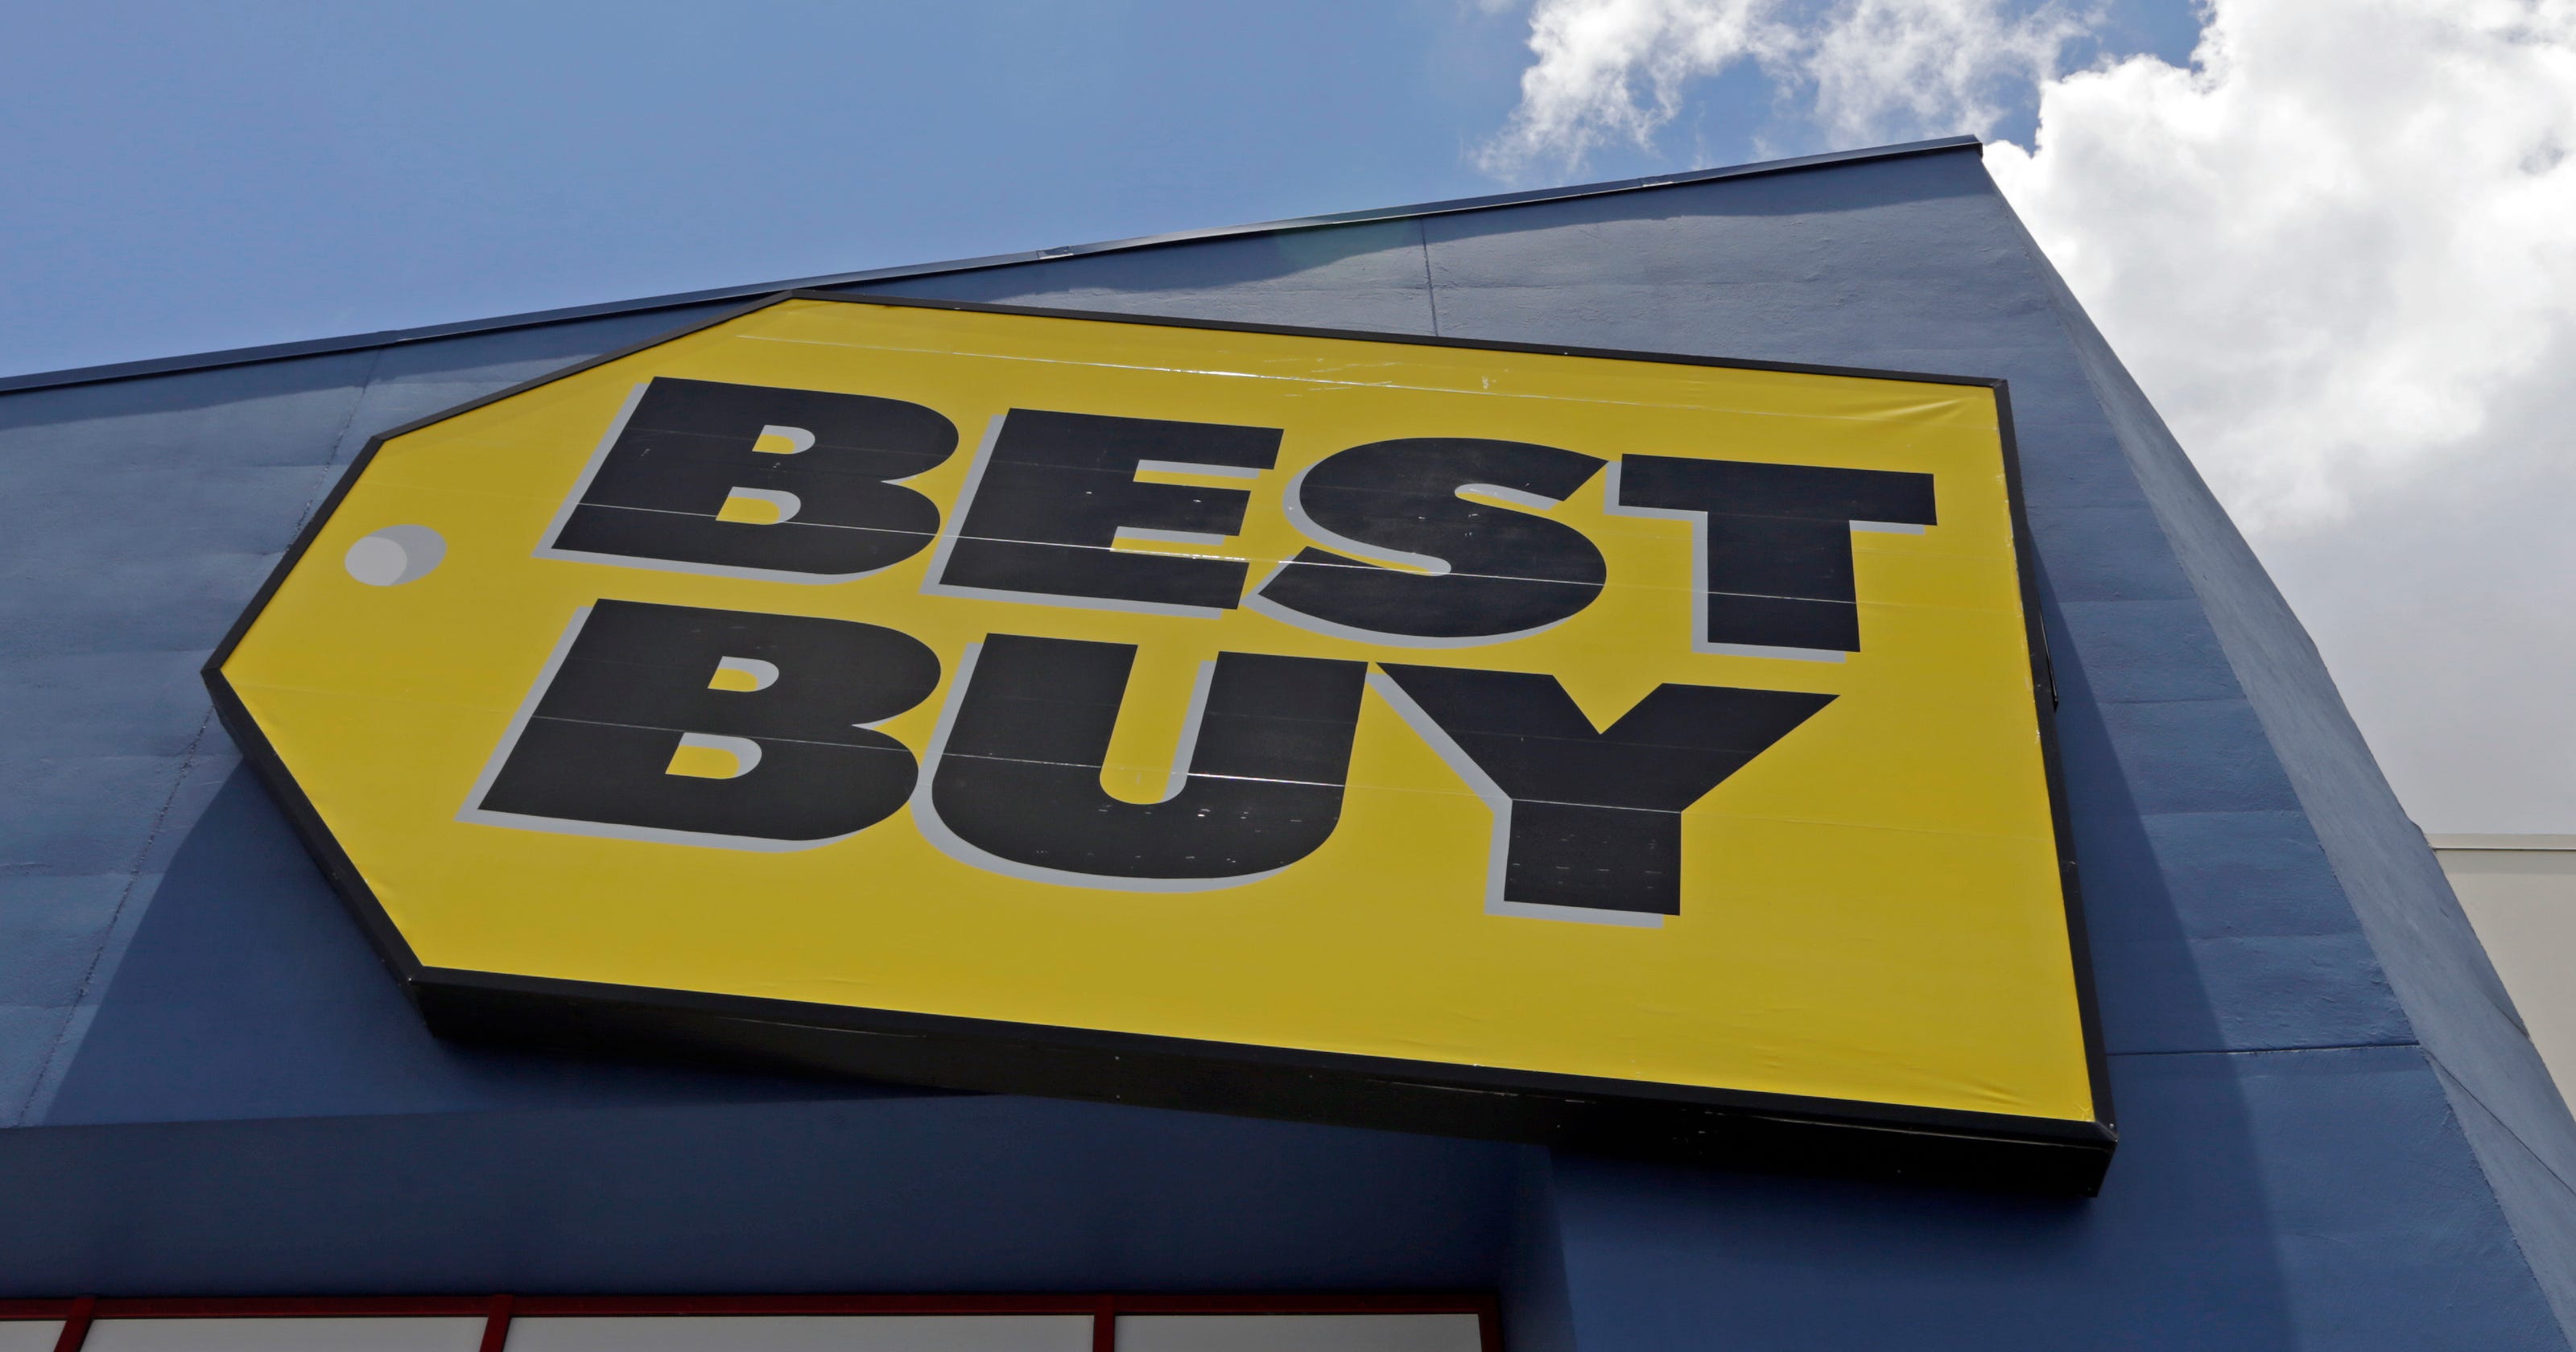 Best Buy offers free shipping for holidays3200 x 1680